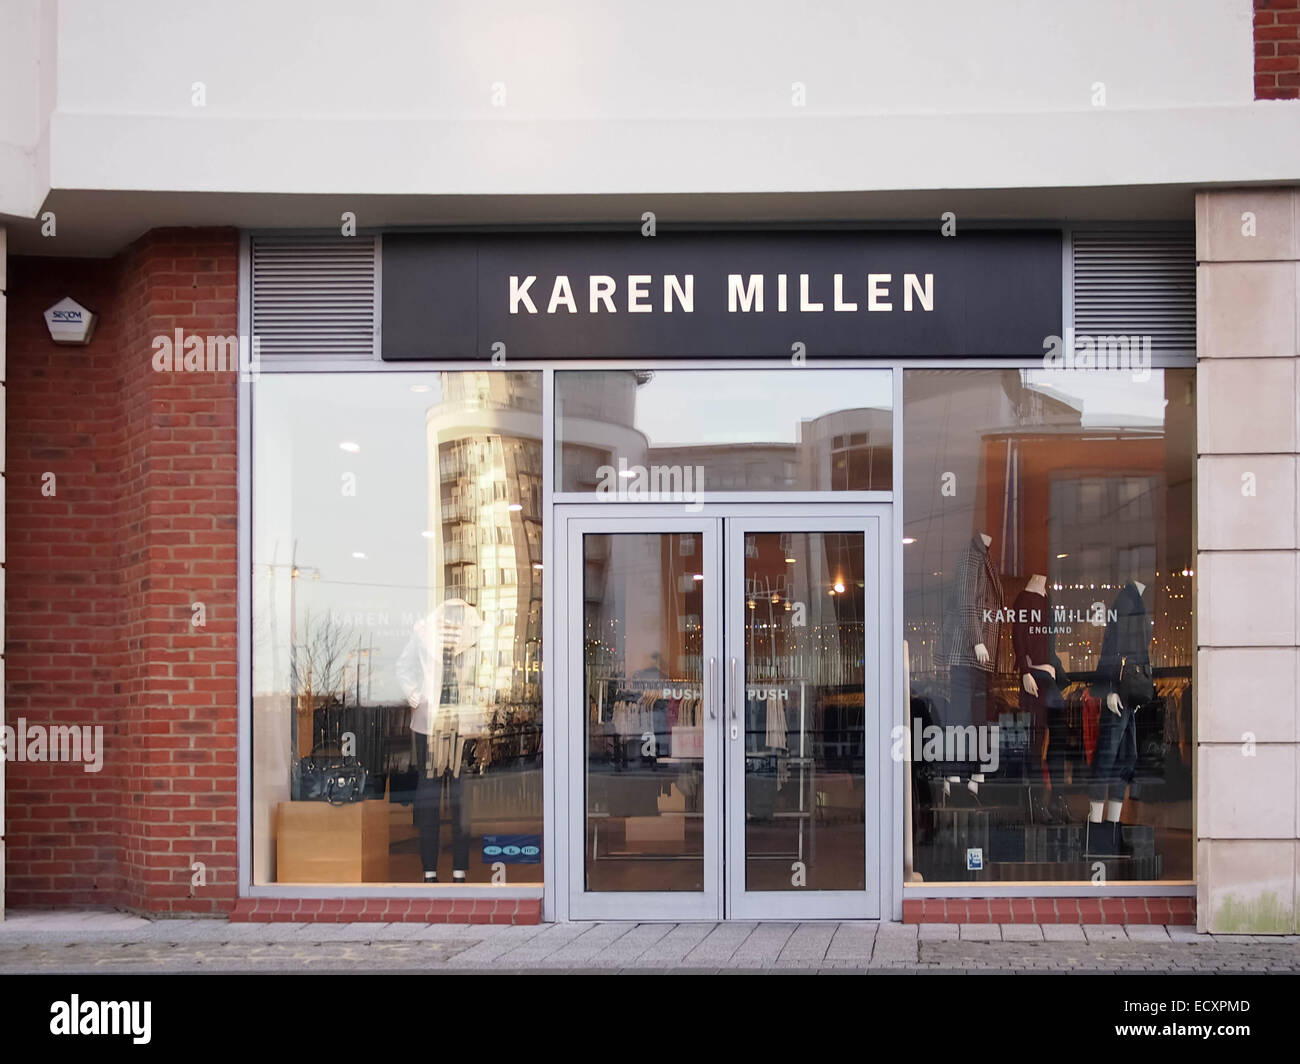 Karen Millen Shop Store High Resolution Stock Photography and Images - Alamy